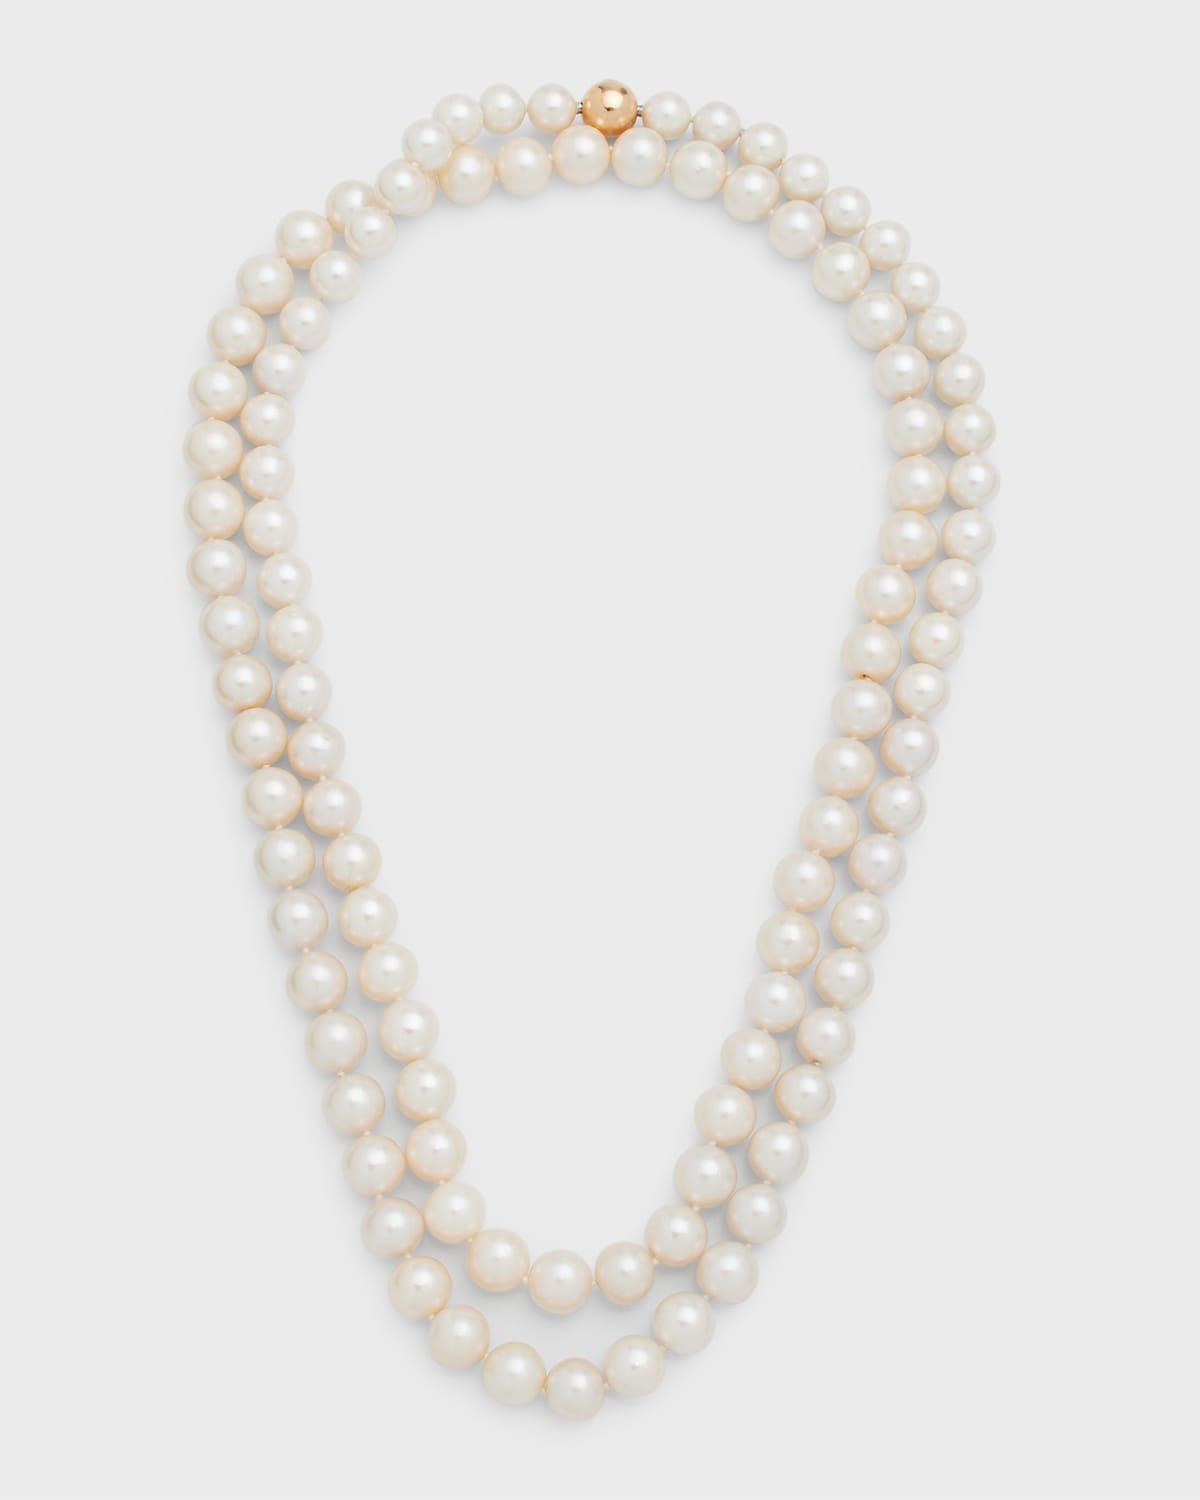 Utopia Freshwater Pearl Necklace, 10-12mm